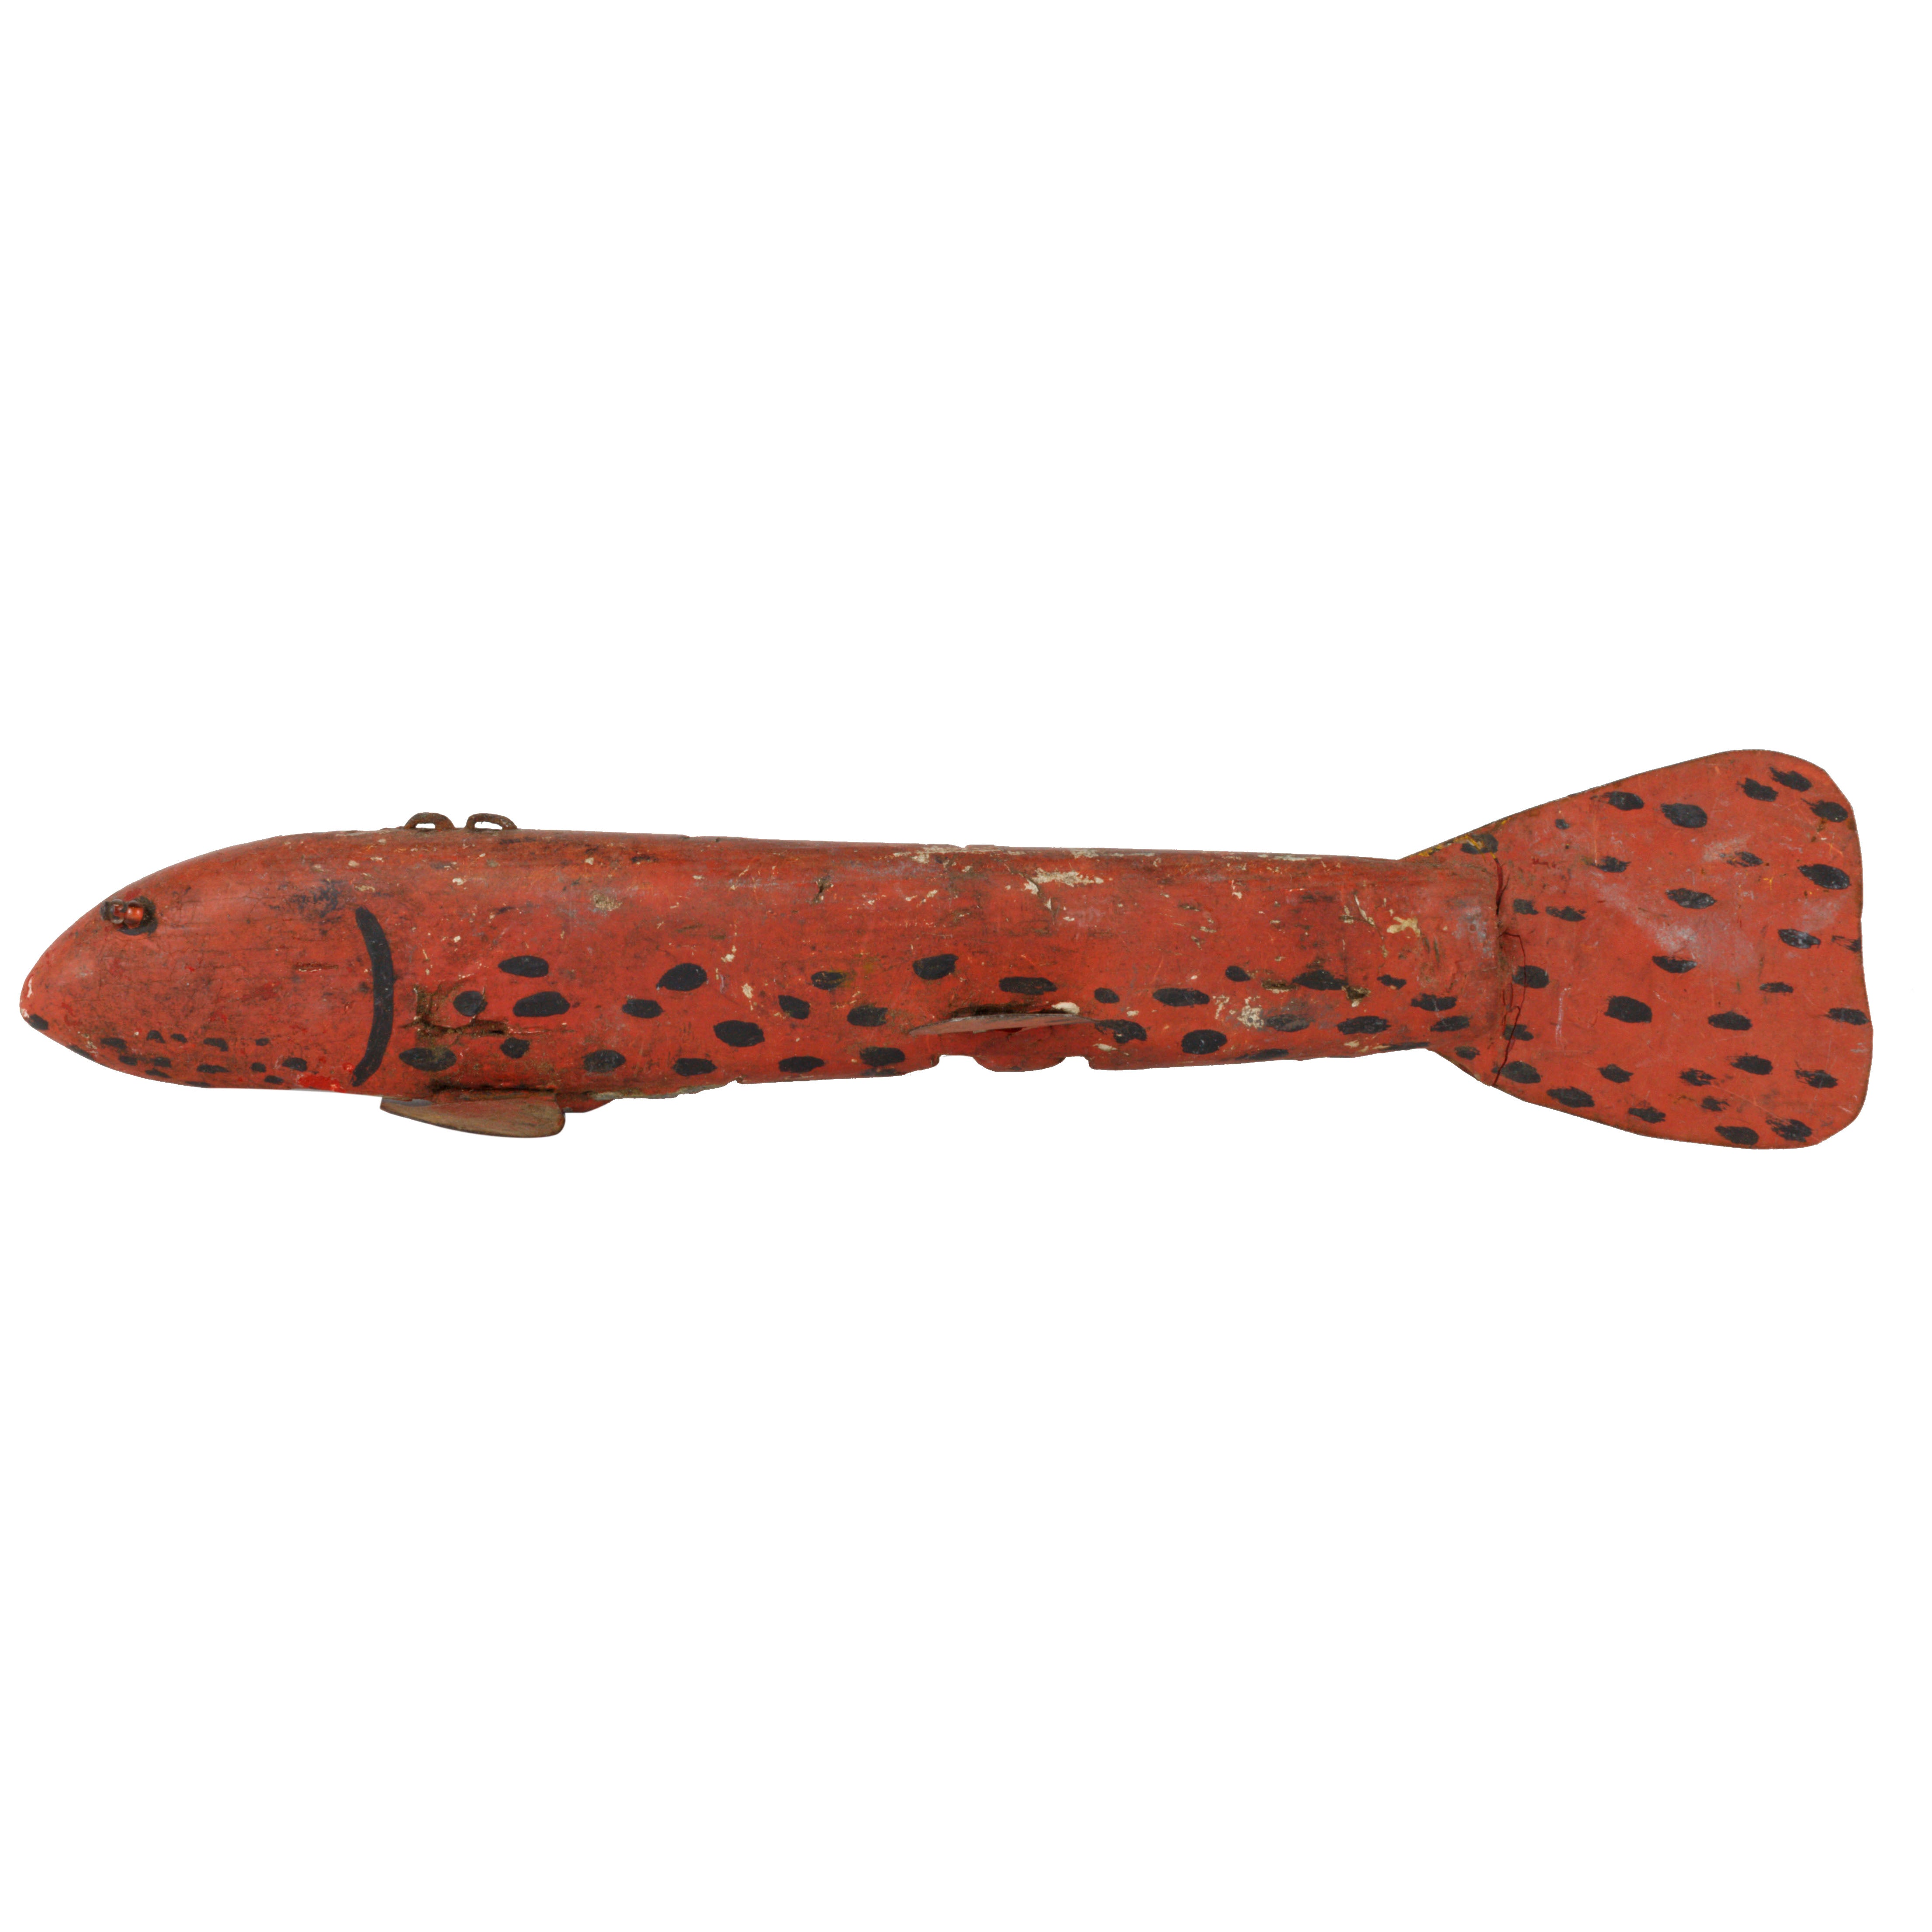 Speckled Stylized Spearfish Decoy, Sporting Goods, Fishing, Decoy